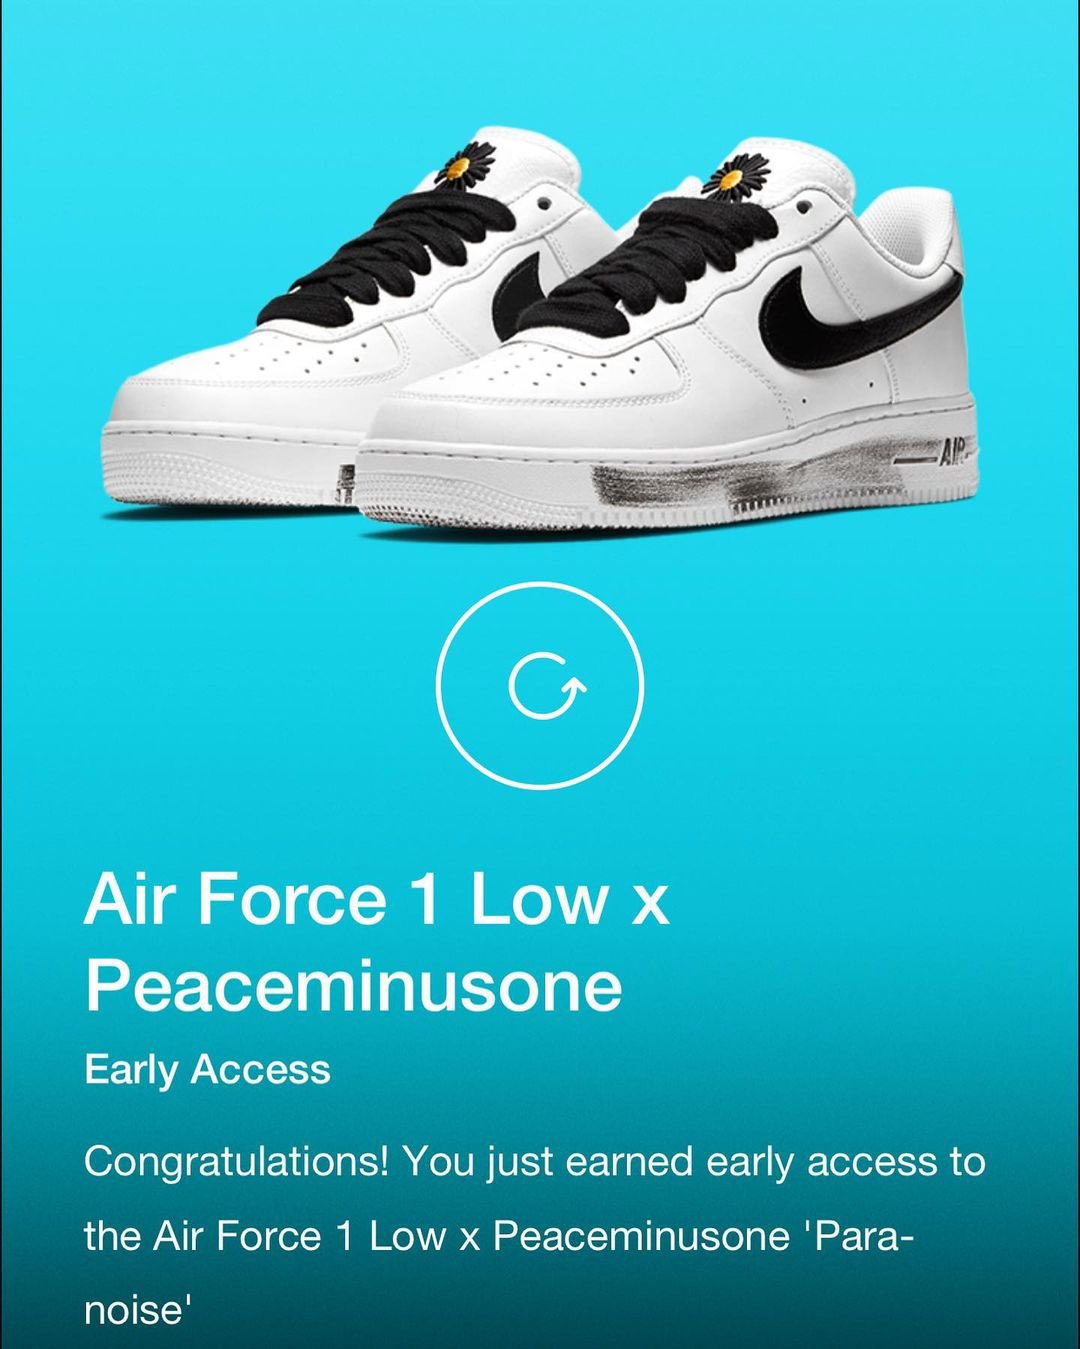 Complex Sneakers en "Check SNKRS for early access to the “Para-noise” Air Force 1. https://t.co/t8OTGYZ01g" Twitter